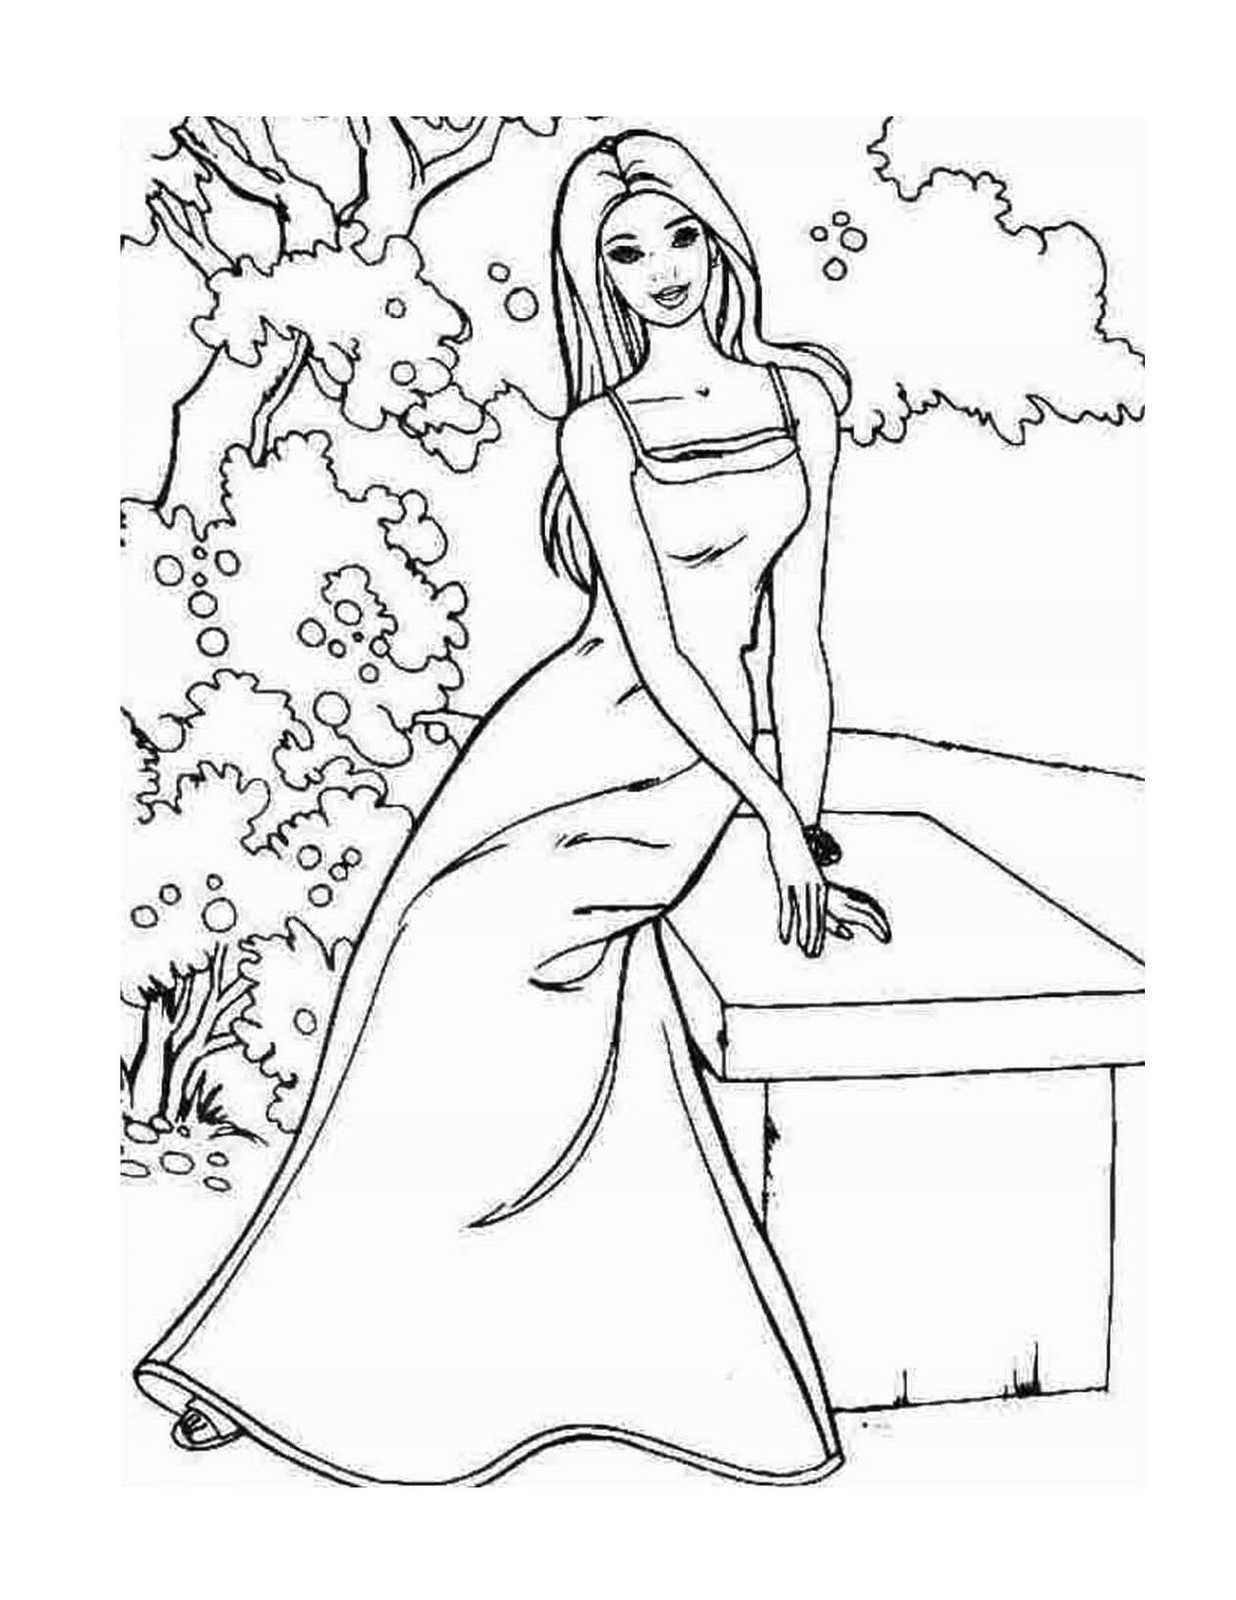 Drawing Barbie #27586 (Cartoons) – Printable coloring pages